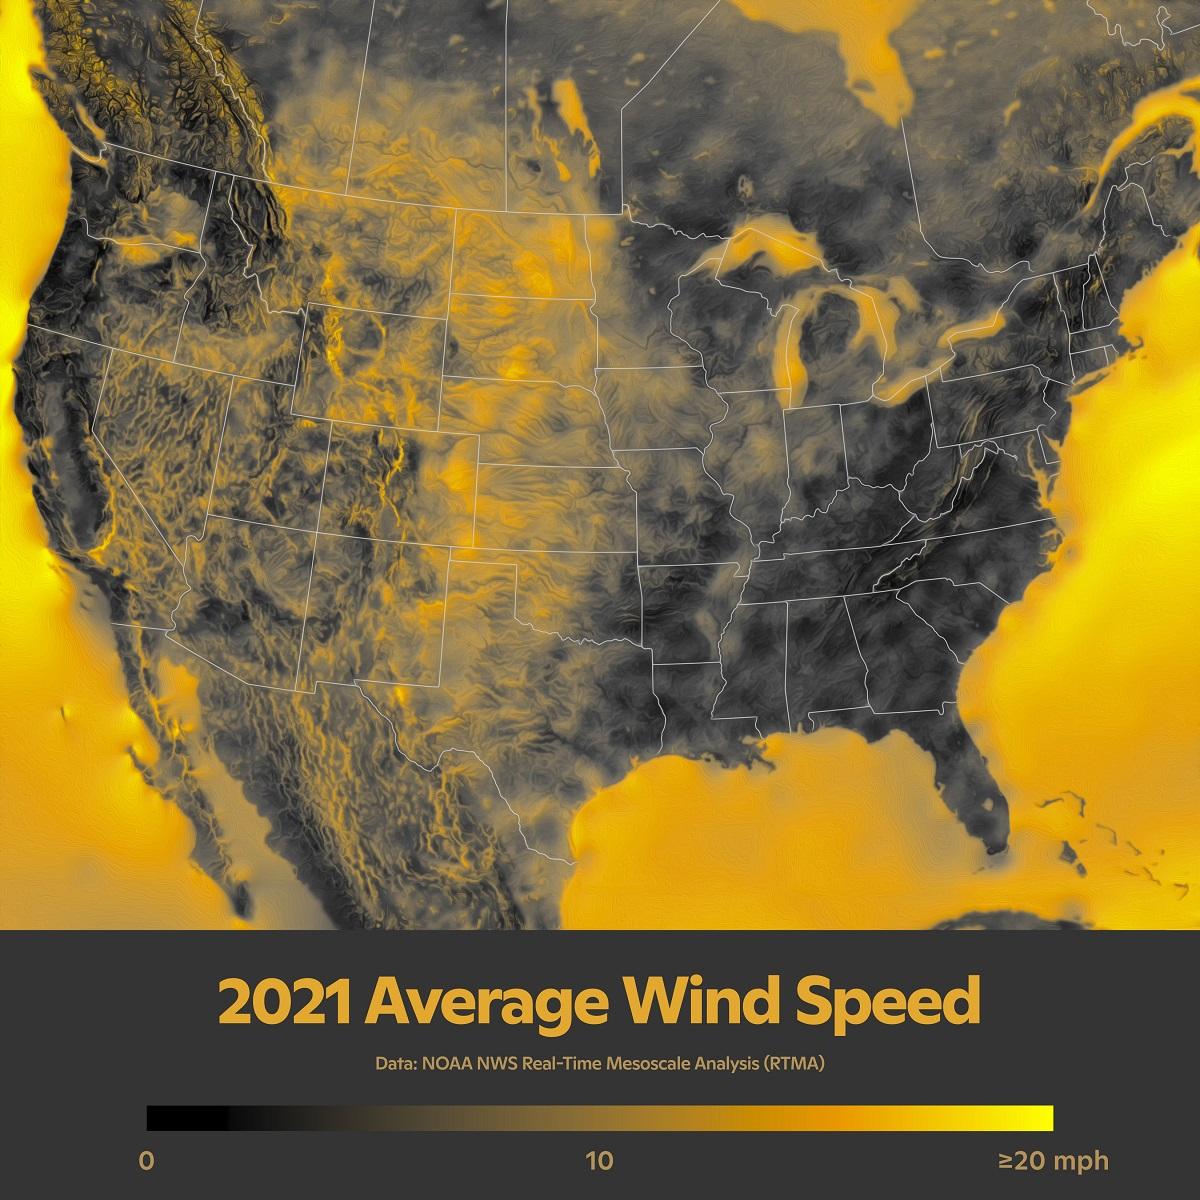 a map of average wind speed across the continental U.S. in 2021